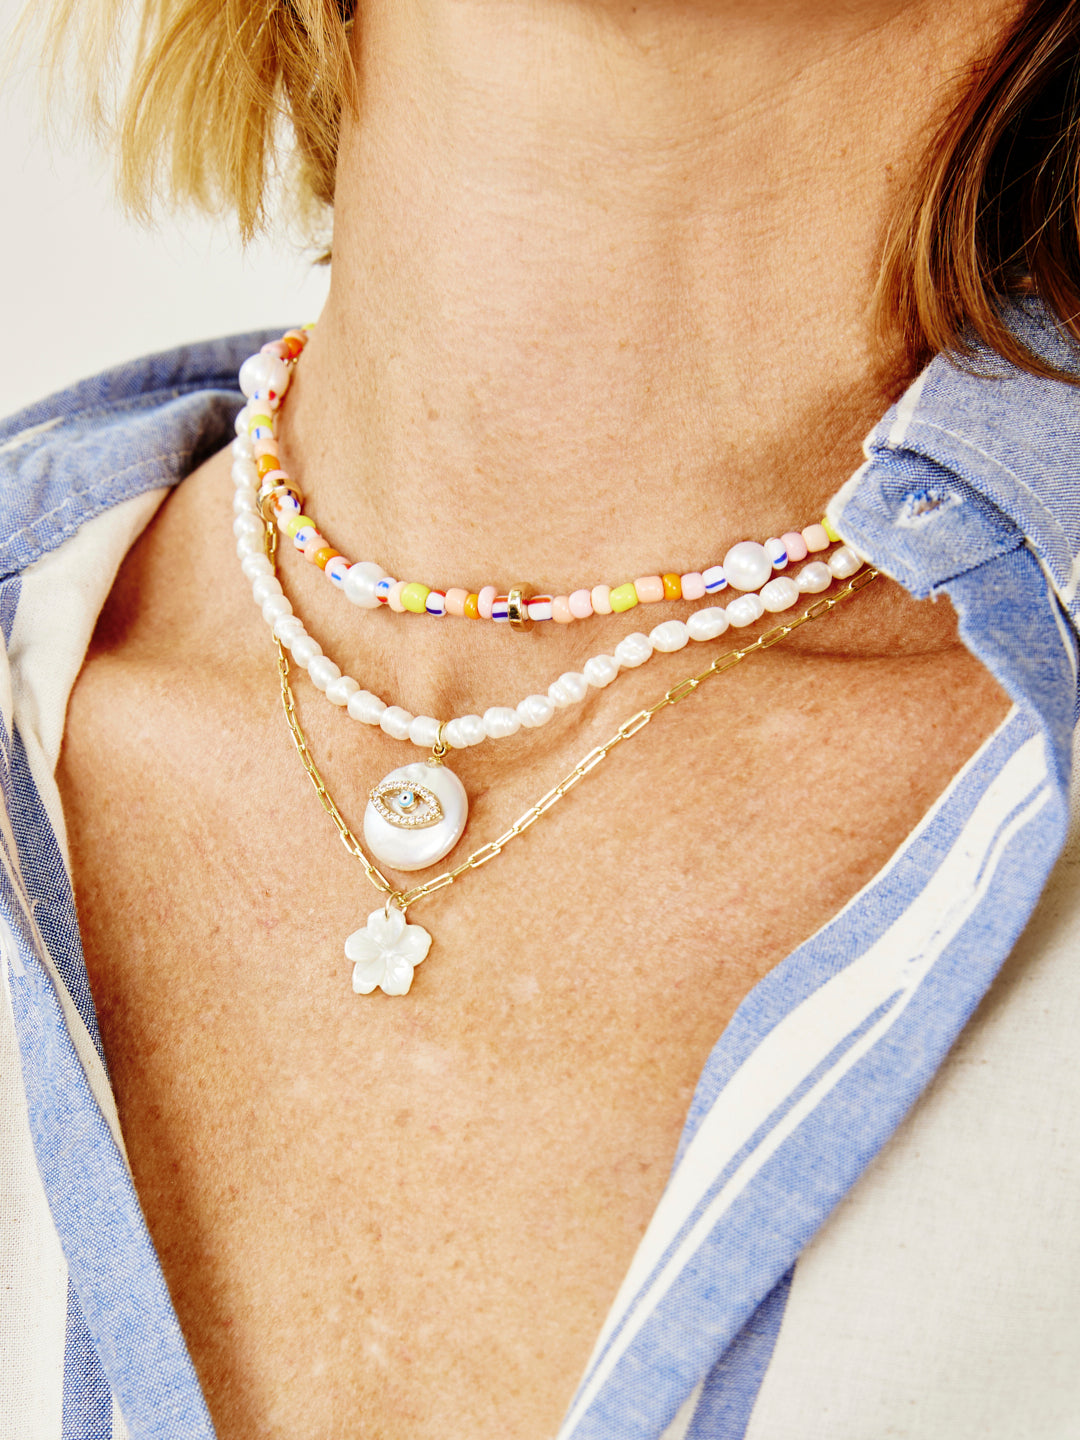 Pearl Fishers Bead Necklace  - Sunset